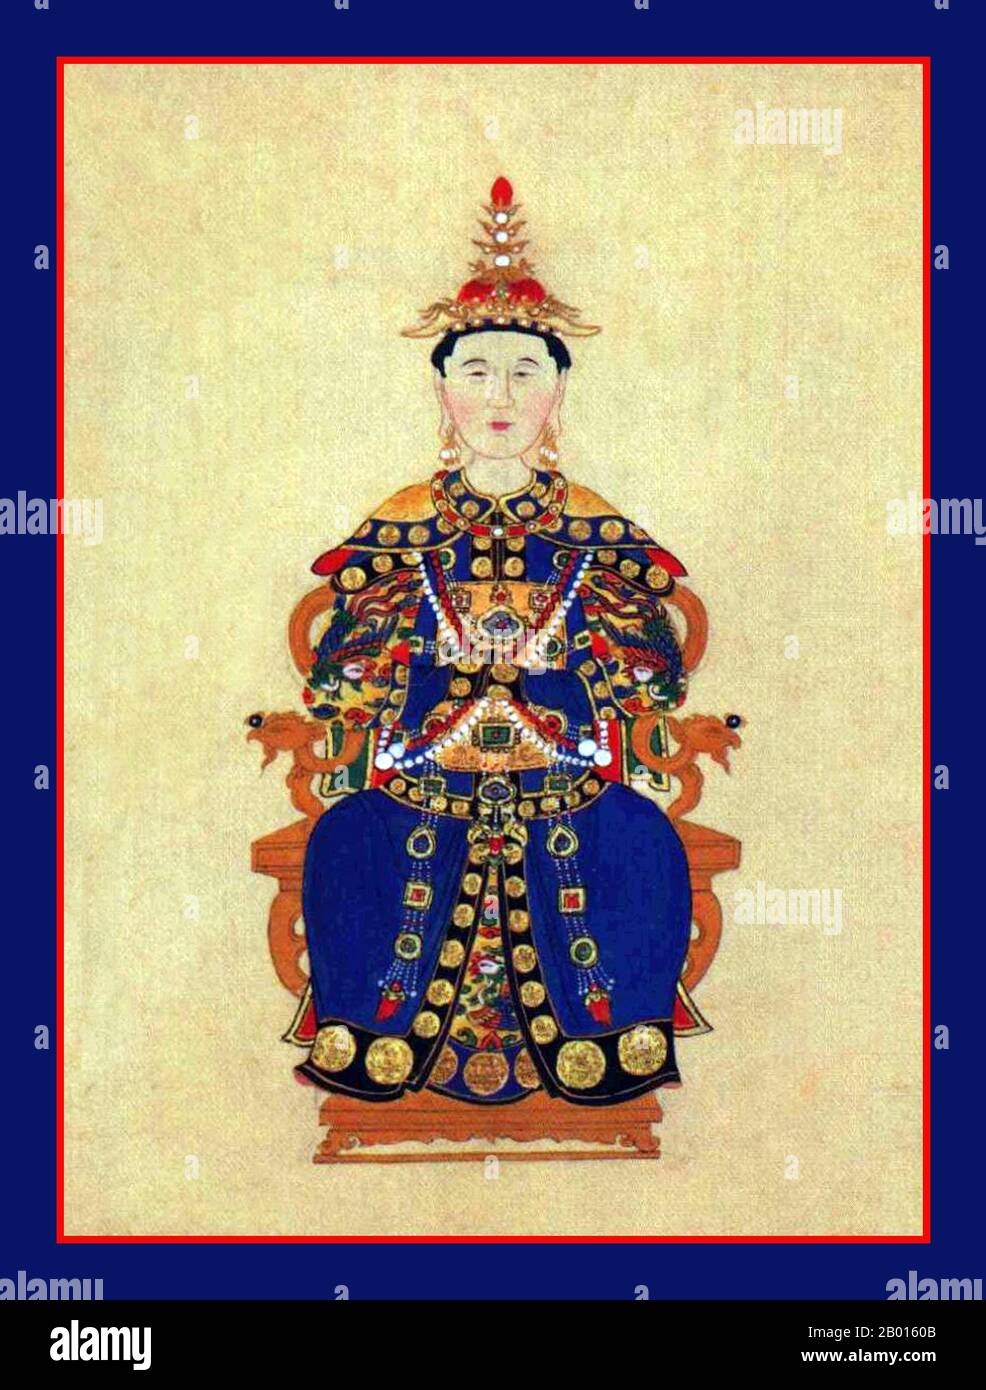 China: Empress Xiao Hui Zhang (5 November 1641 - 7 January 1718) second consort of the Shunzhi Emperor. Hanging scroll painting, late 17th century.  Empress Xiaohuizhang, born Alatan Qiqige, was originally of the Khorchin Mongol Borjigit clan. When Shunzhi's first Empress was demoted in 1653, Xiaohuizhang she was promoted to Consort. One year later she officially became Shunzhi's second Empress. When the Kangxi Emperor ascended the throne, she was honoured as Dowager Empress Renxian, although she was not the biological mother of the new emperor. Stock Photo